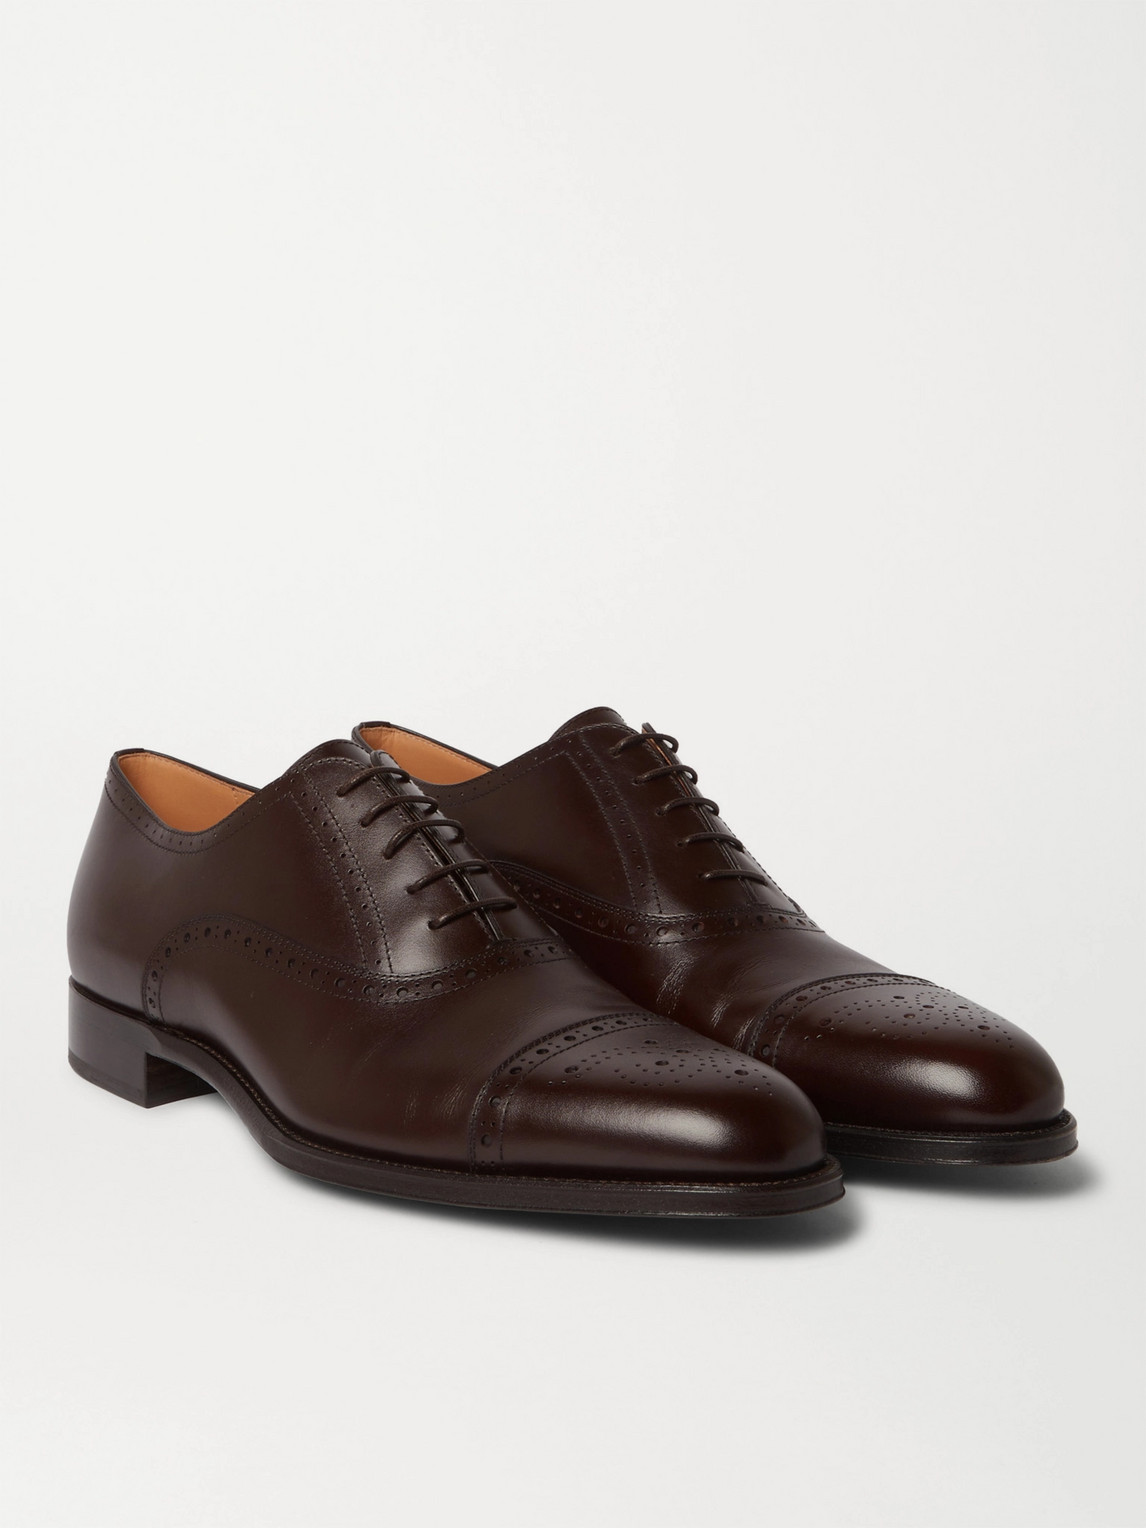 Dunhill Kensington Leather Oxford Brogues In Brown